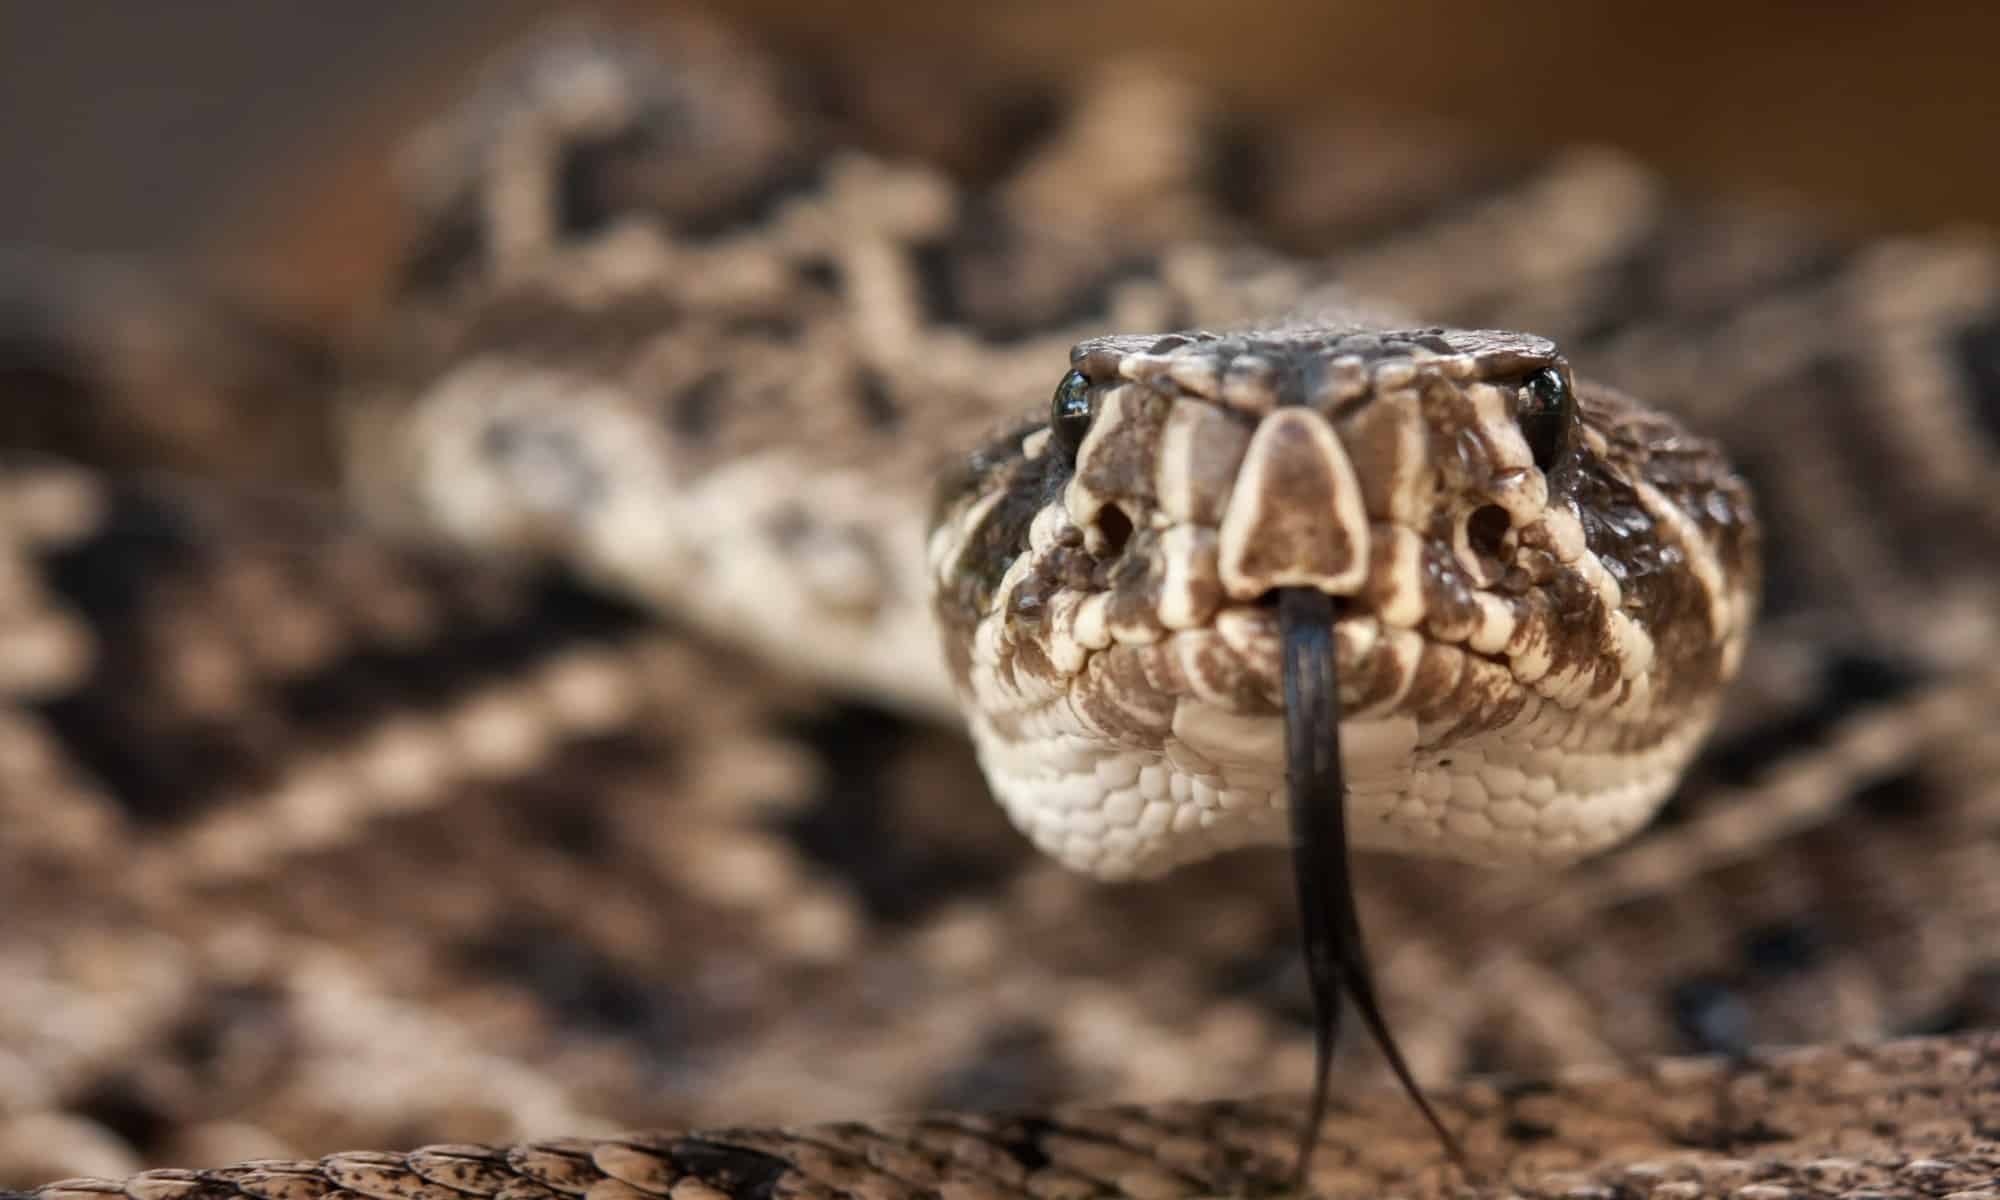 Top 5 Prey Animals of Rattlesnakes: What They Eat in the Wild